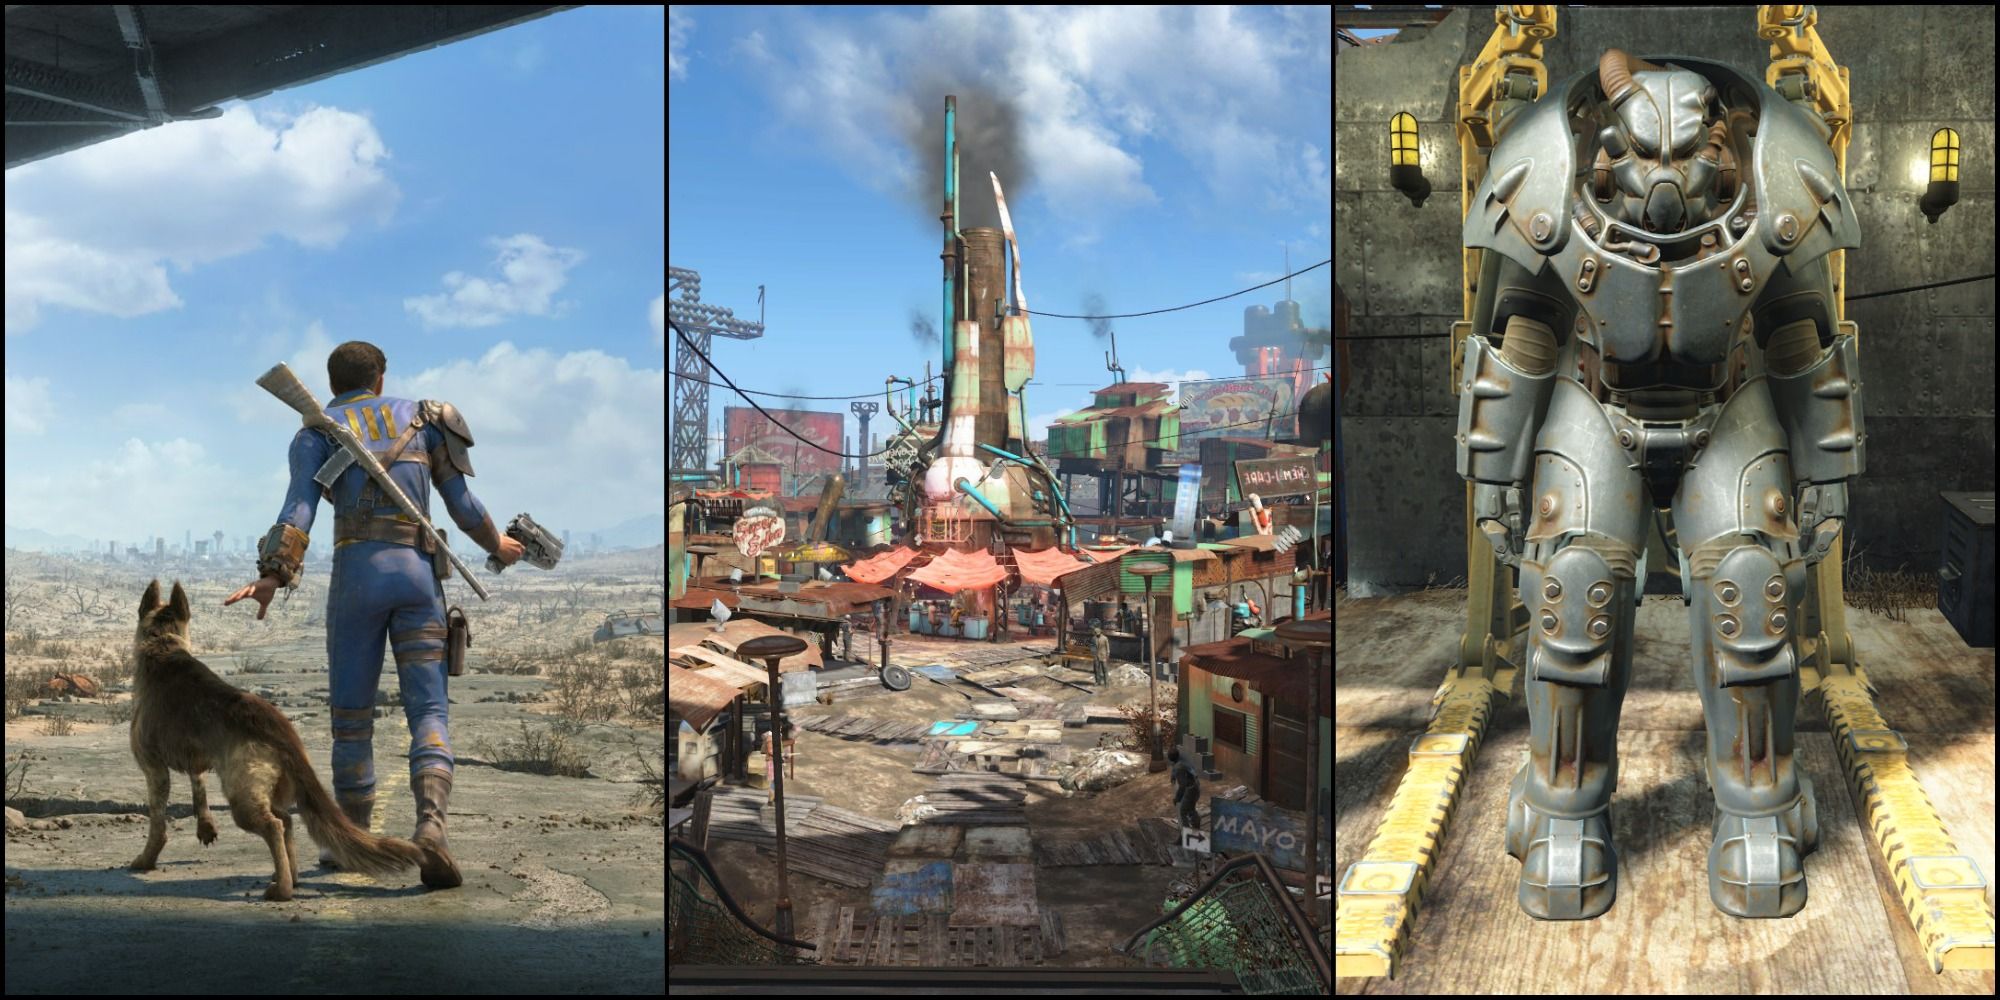 A split image for Fallout 4 featuring the Sole Survivor and Dogmeat to the left, Diamond City in the middle and a set of power armor to the right